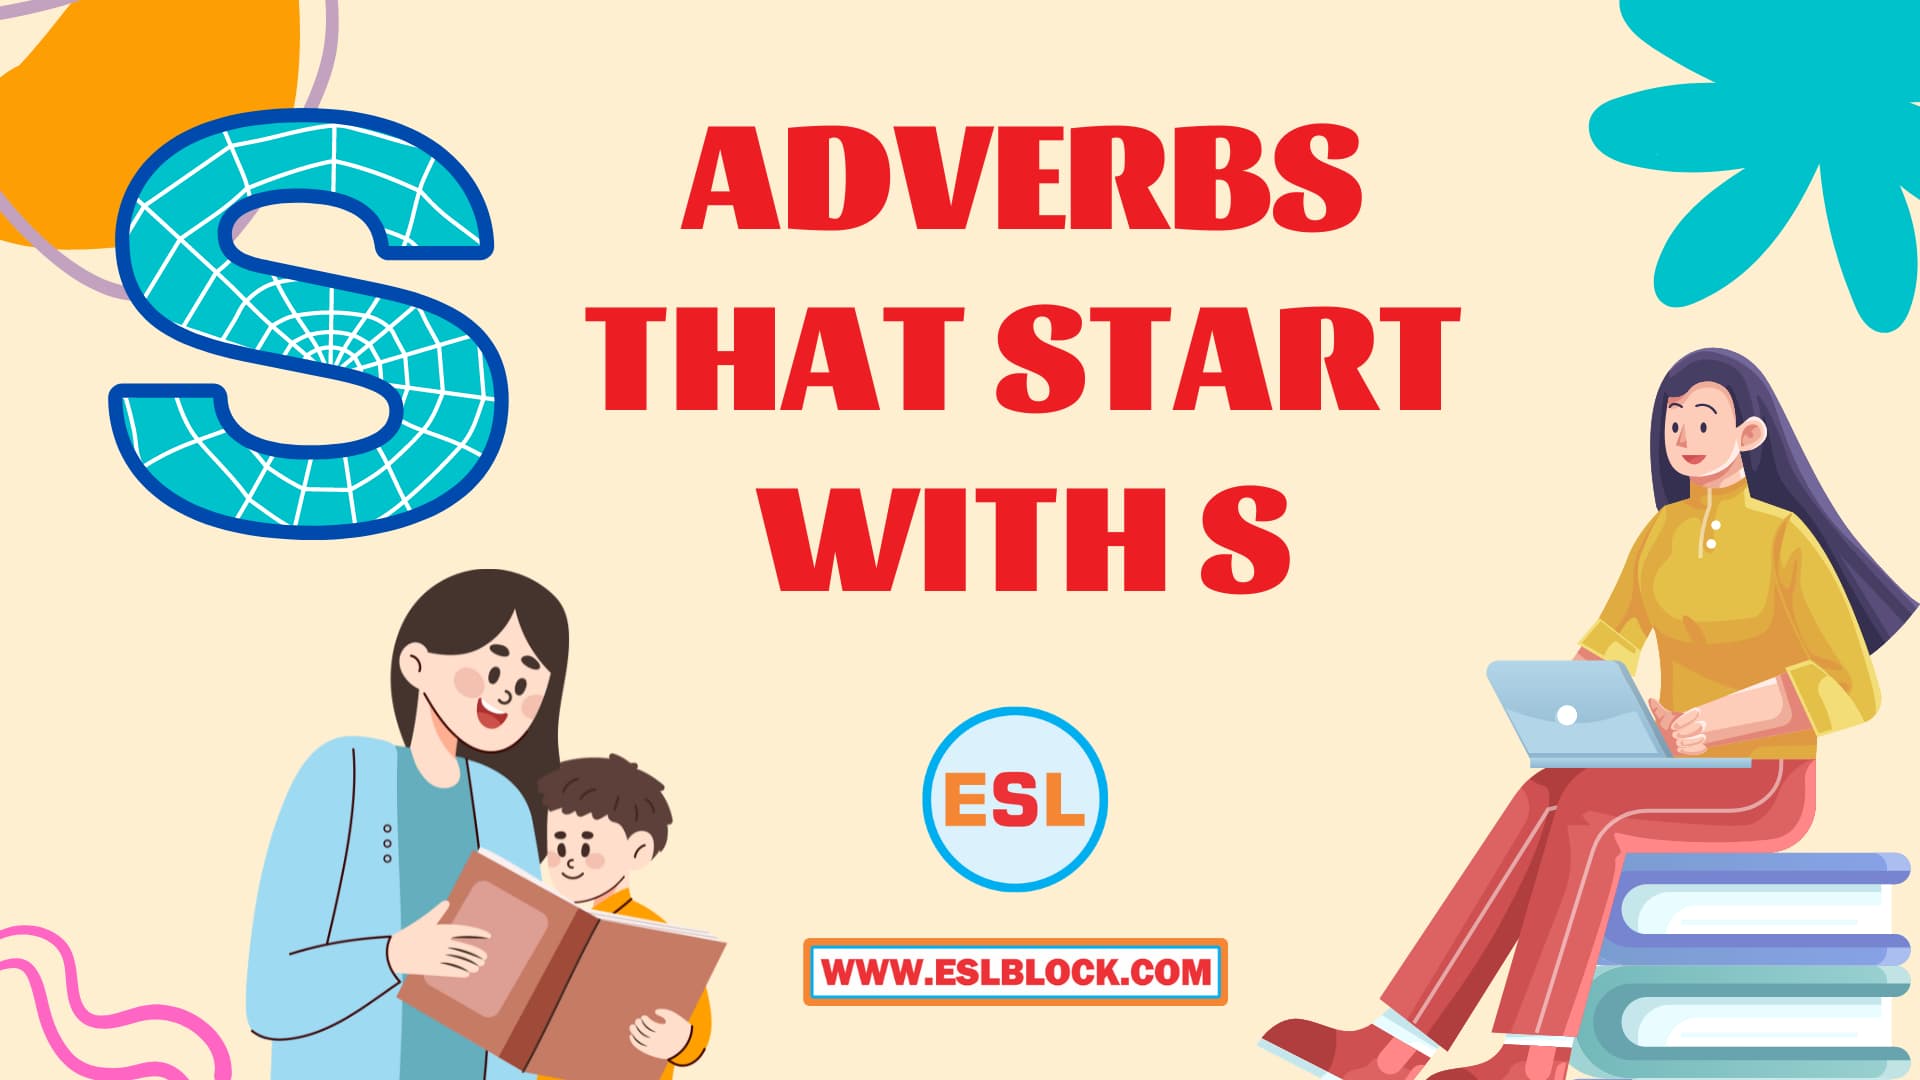 100 Example Sentences Using Adverbs, 4 Letter Adverbs That Start with S, 4 Letter Words, 5 Letter Adverbs That Start with S, 5 Letter Words, 6 Letter Adverbs That Start with S, 6 Letter Words, A to Z Adverbs, AA Adverbs, Adverb vocabulary words, Adverbs, Adverbs That Start with S, Adverbs with Example Sentences, All Adverbs, Types of Adverbs, Types of Adverbs with Example Sentences, Vocabulary, What are Adverbs, What are the types of Adverbs, Words That with S